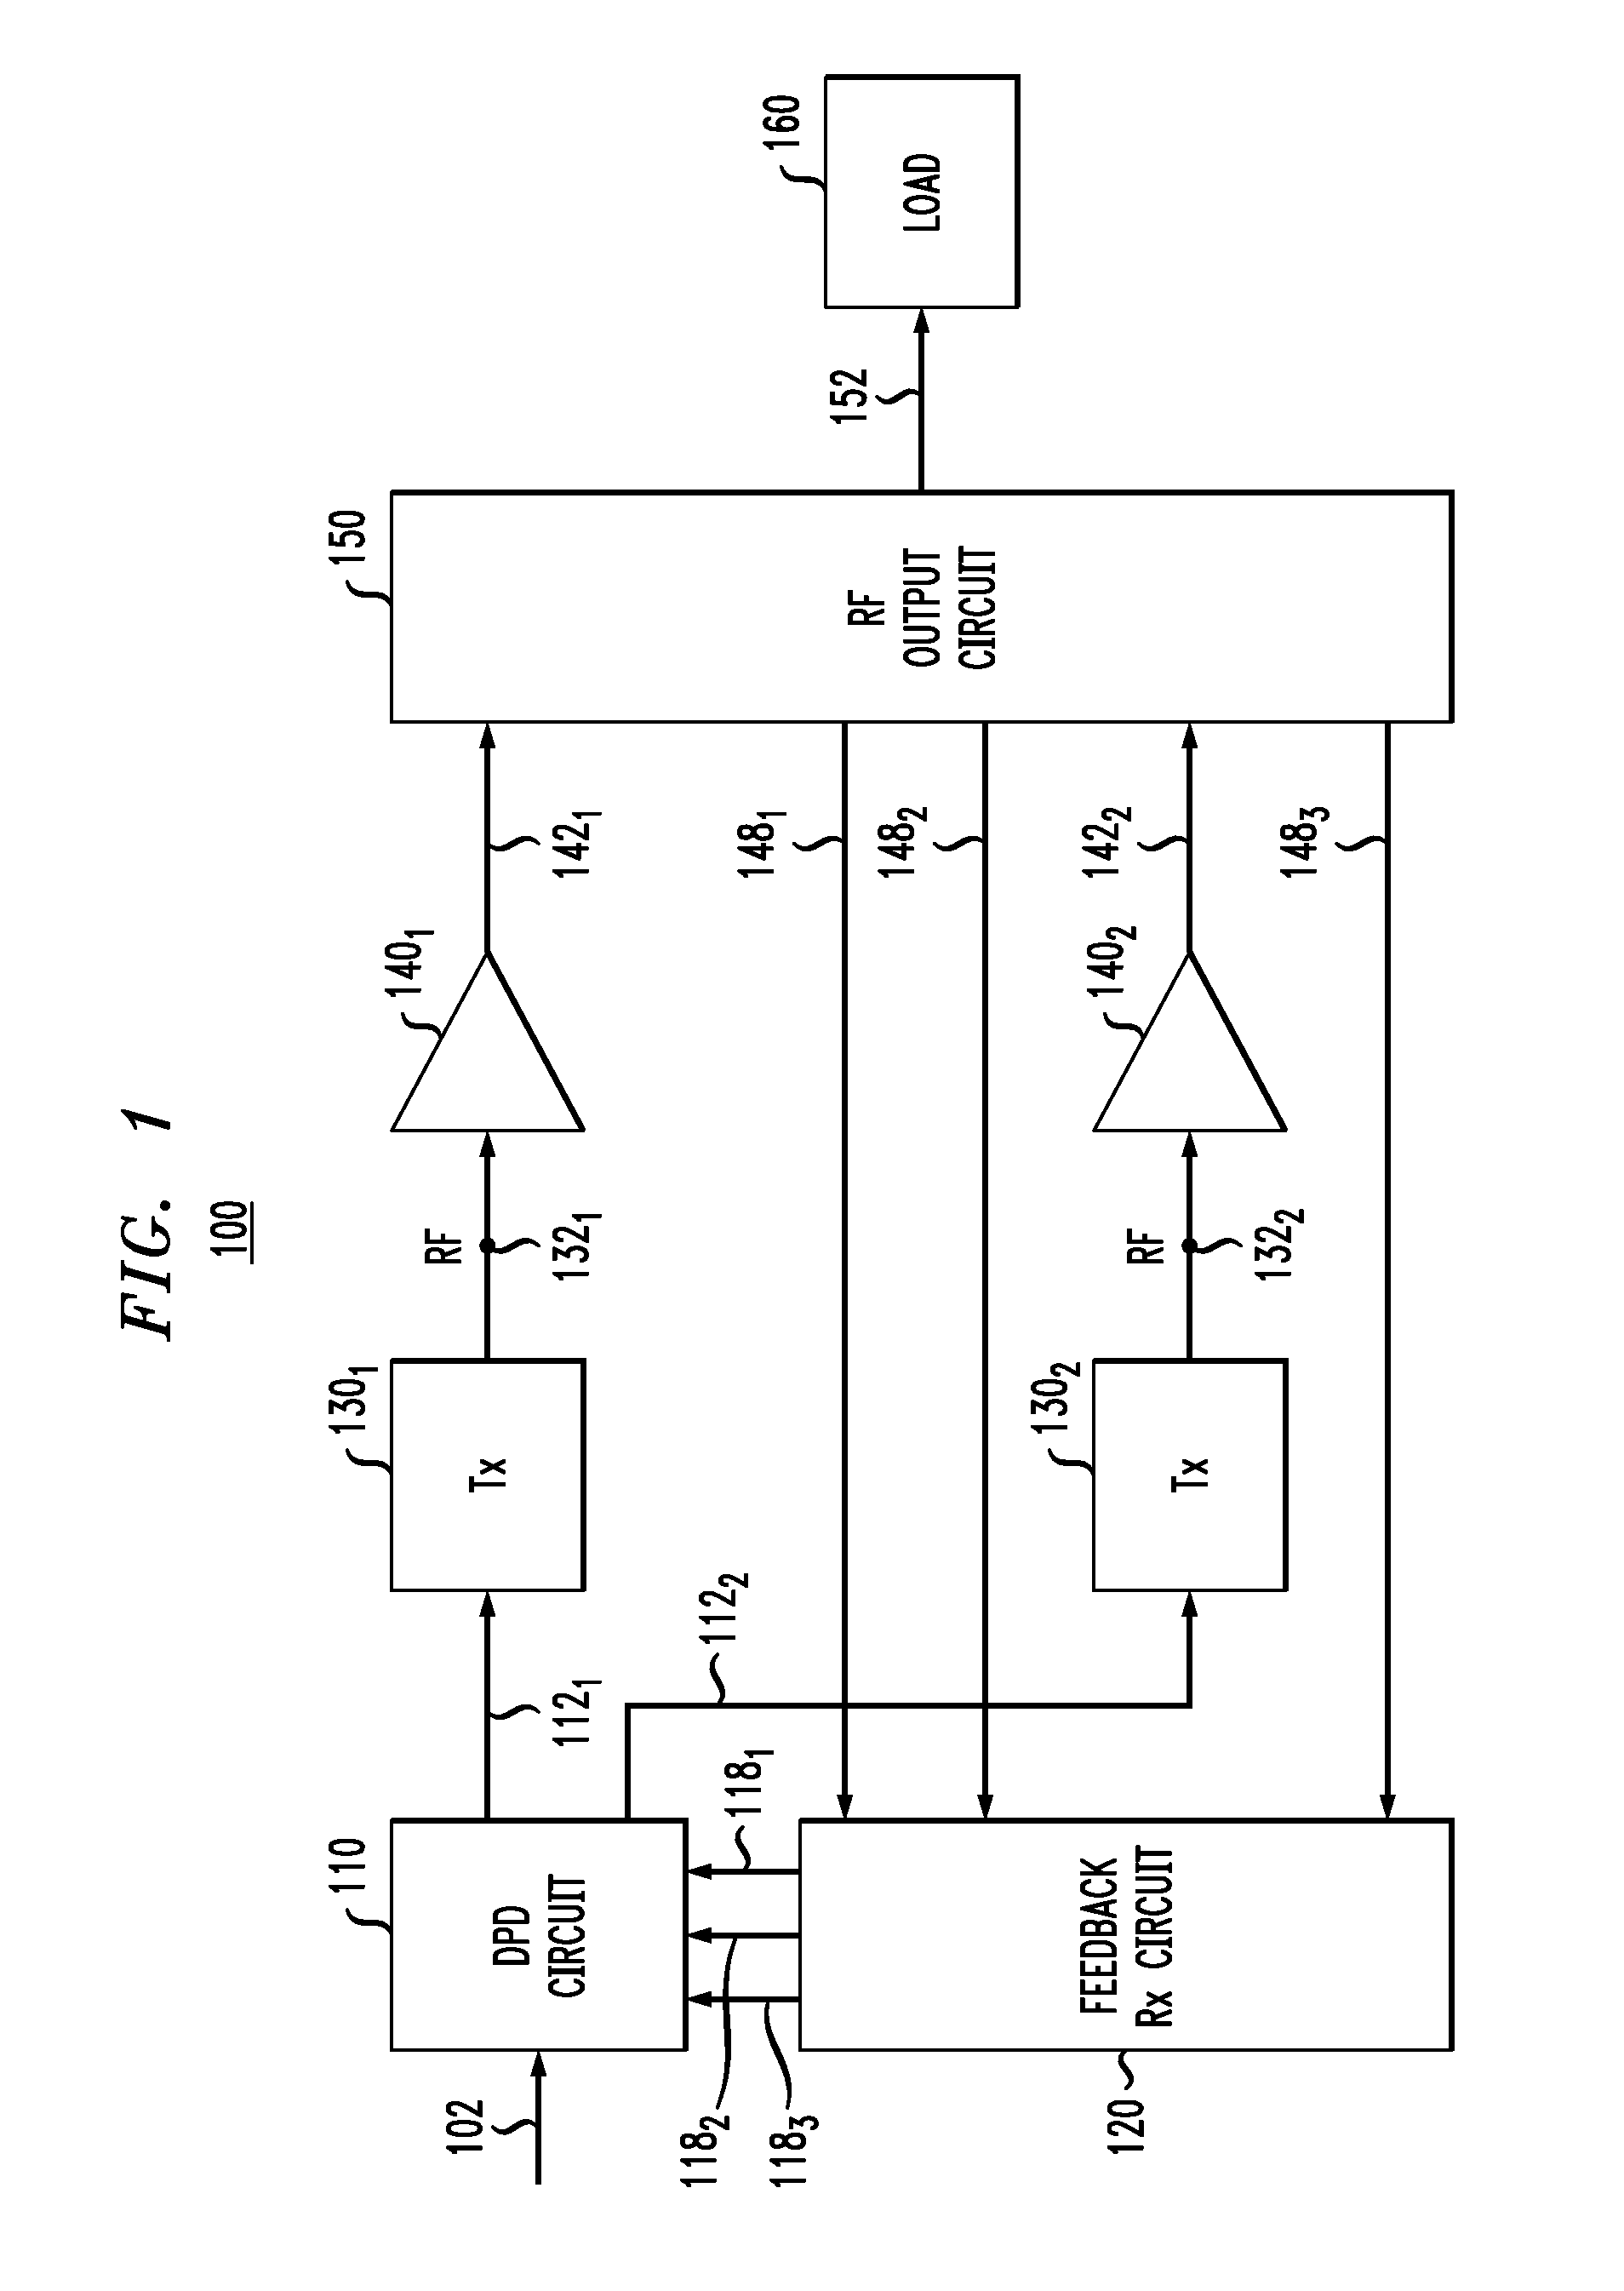 Radio-frequency transmitter, such as for broadcasting and cellular base stations